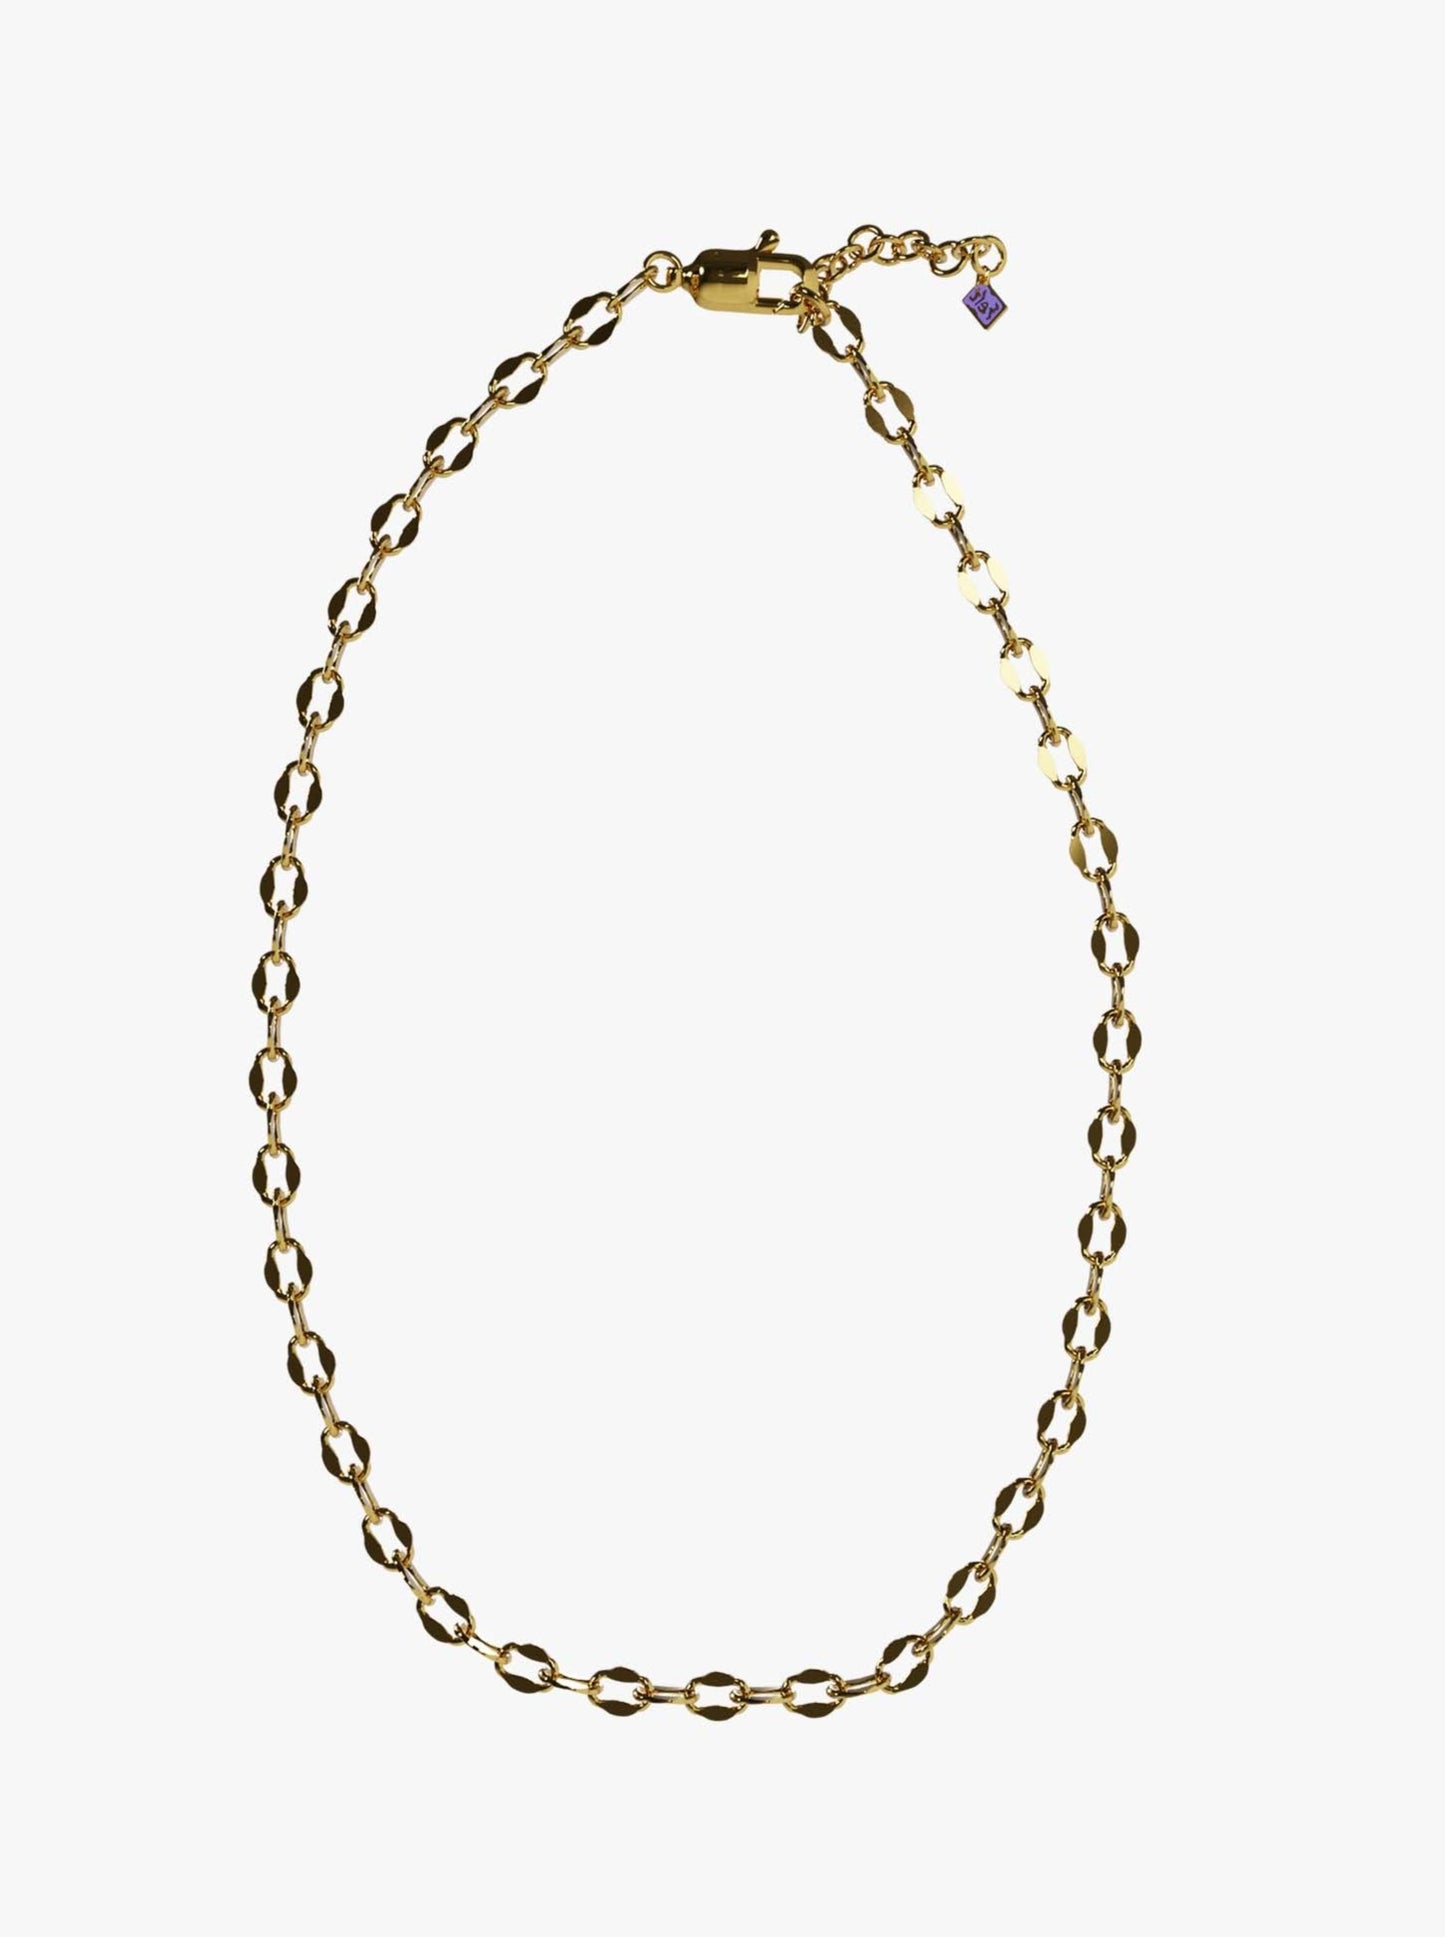 Uxe gold chain